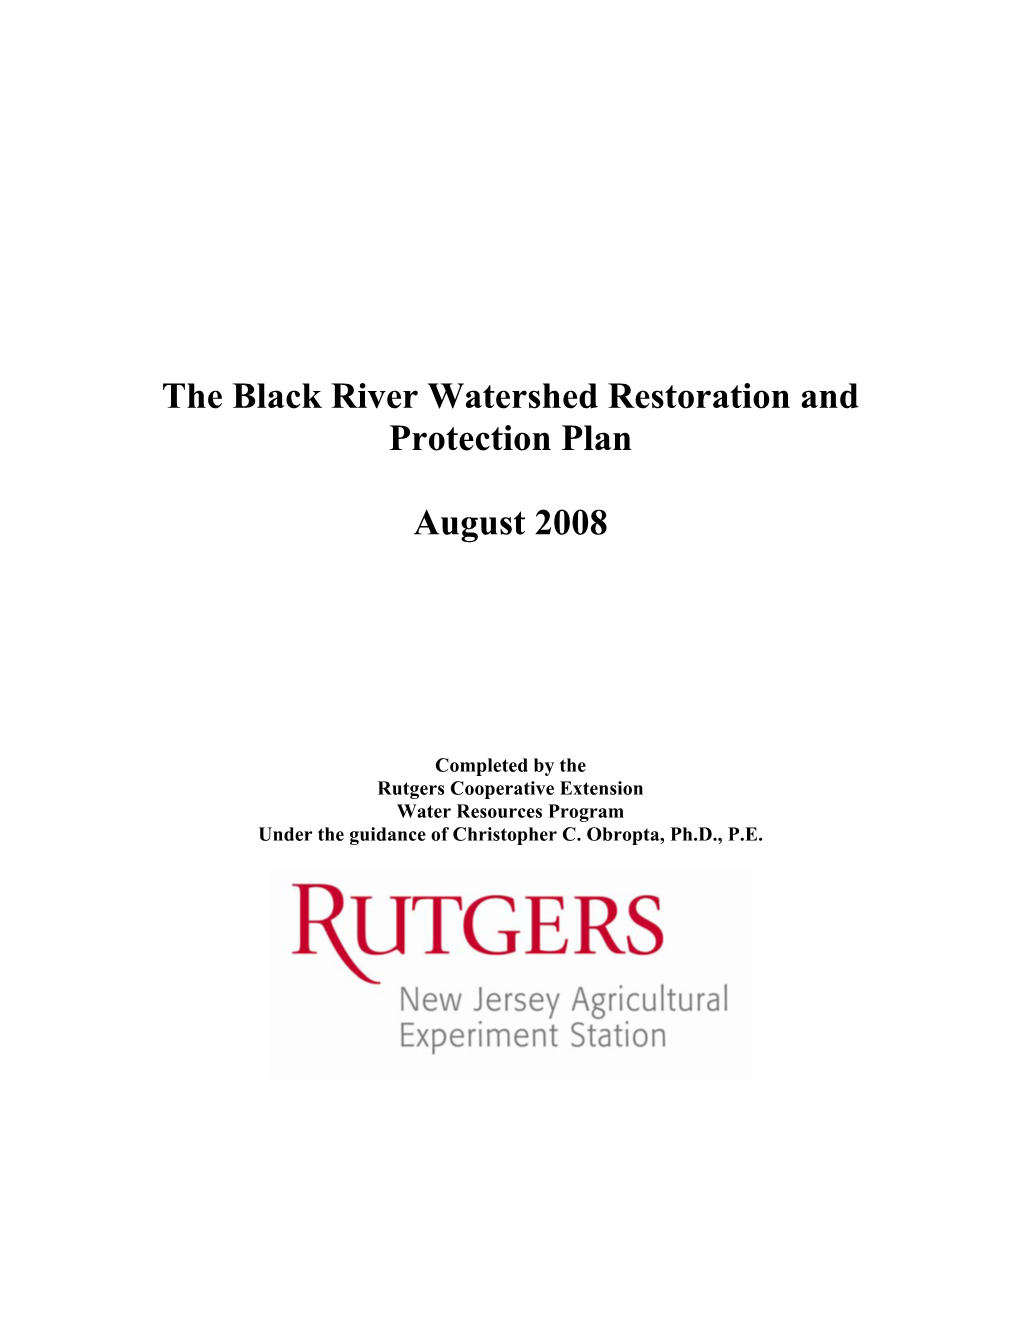 The Black River Watershed Restoration and Protection Plan